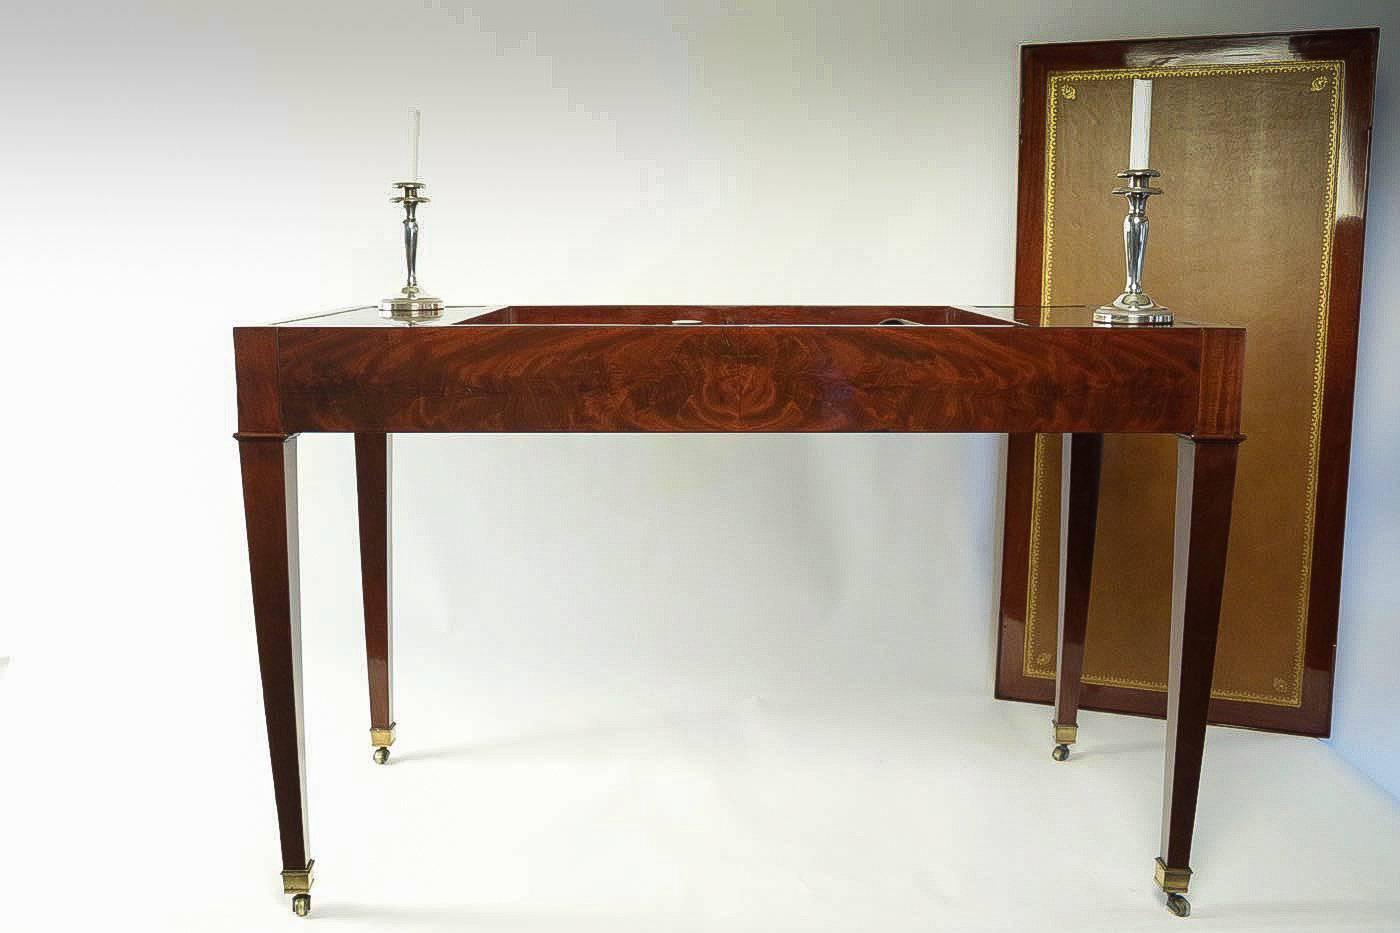 Jacob Freres Rue Meslée French Directoire Period Reversible Desk and Tric-Trac 1